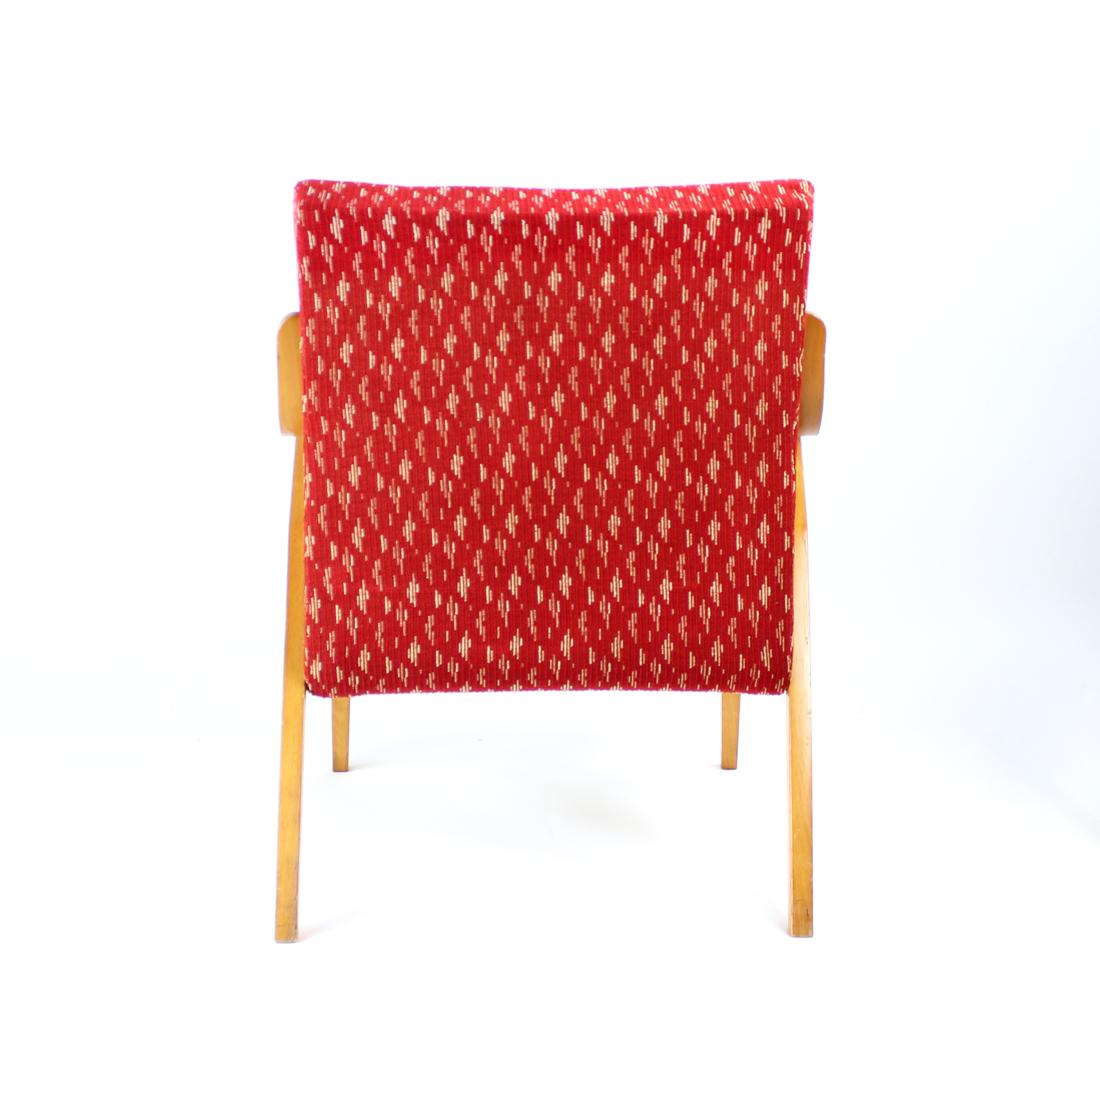 Textile Midcentury Armchair in Original Red Fabric & Blonde Wood, Czechoslovakia, 1960s For Sale